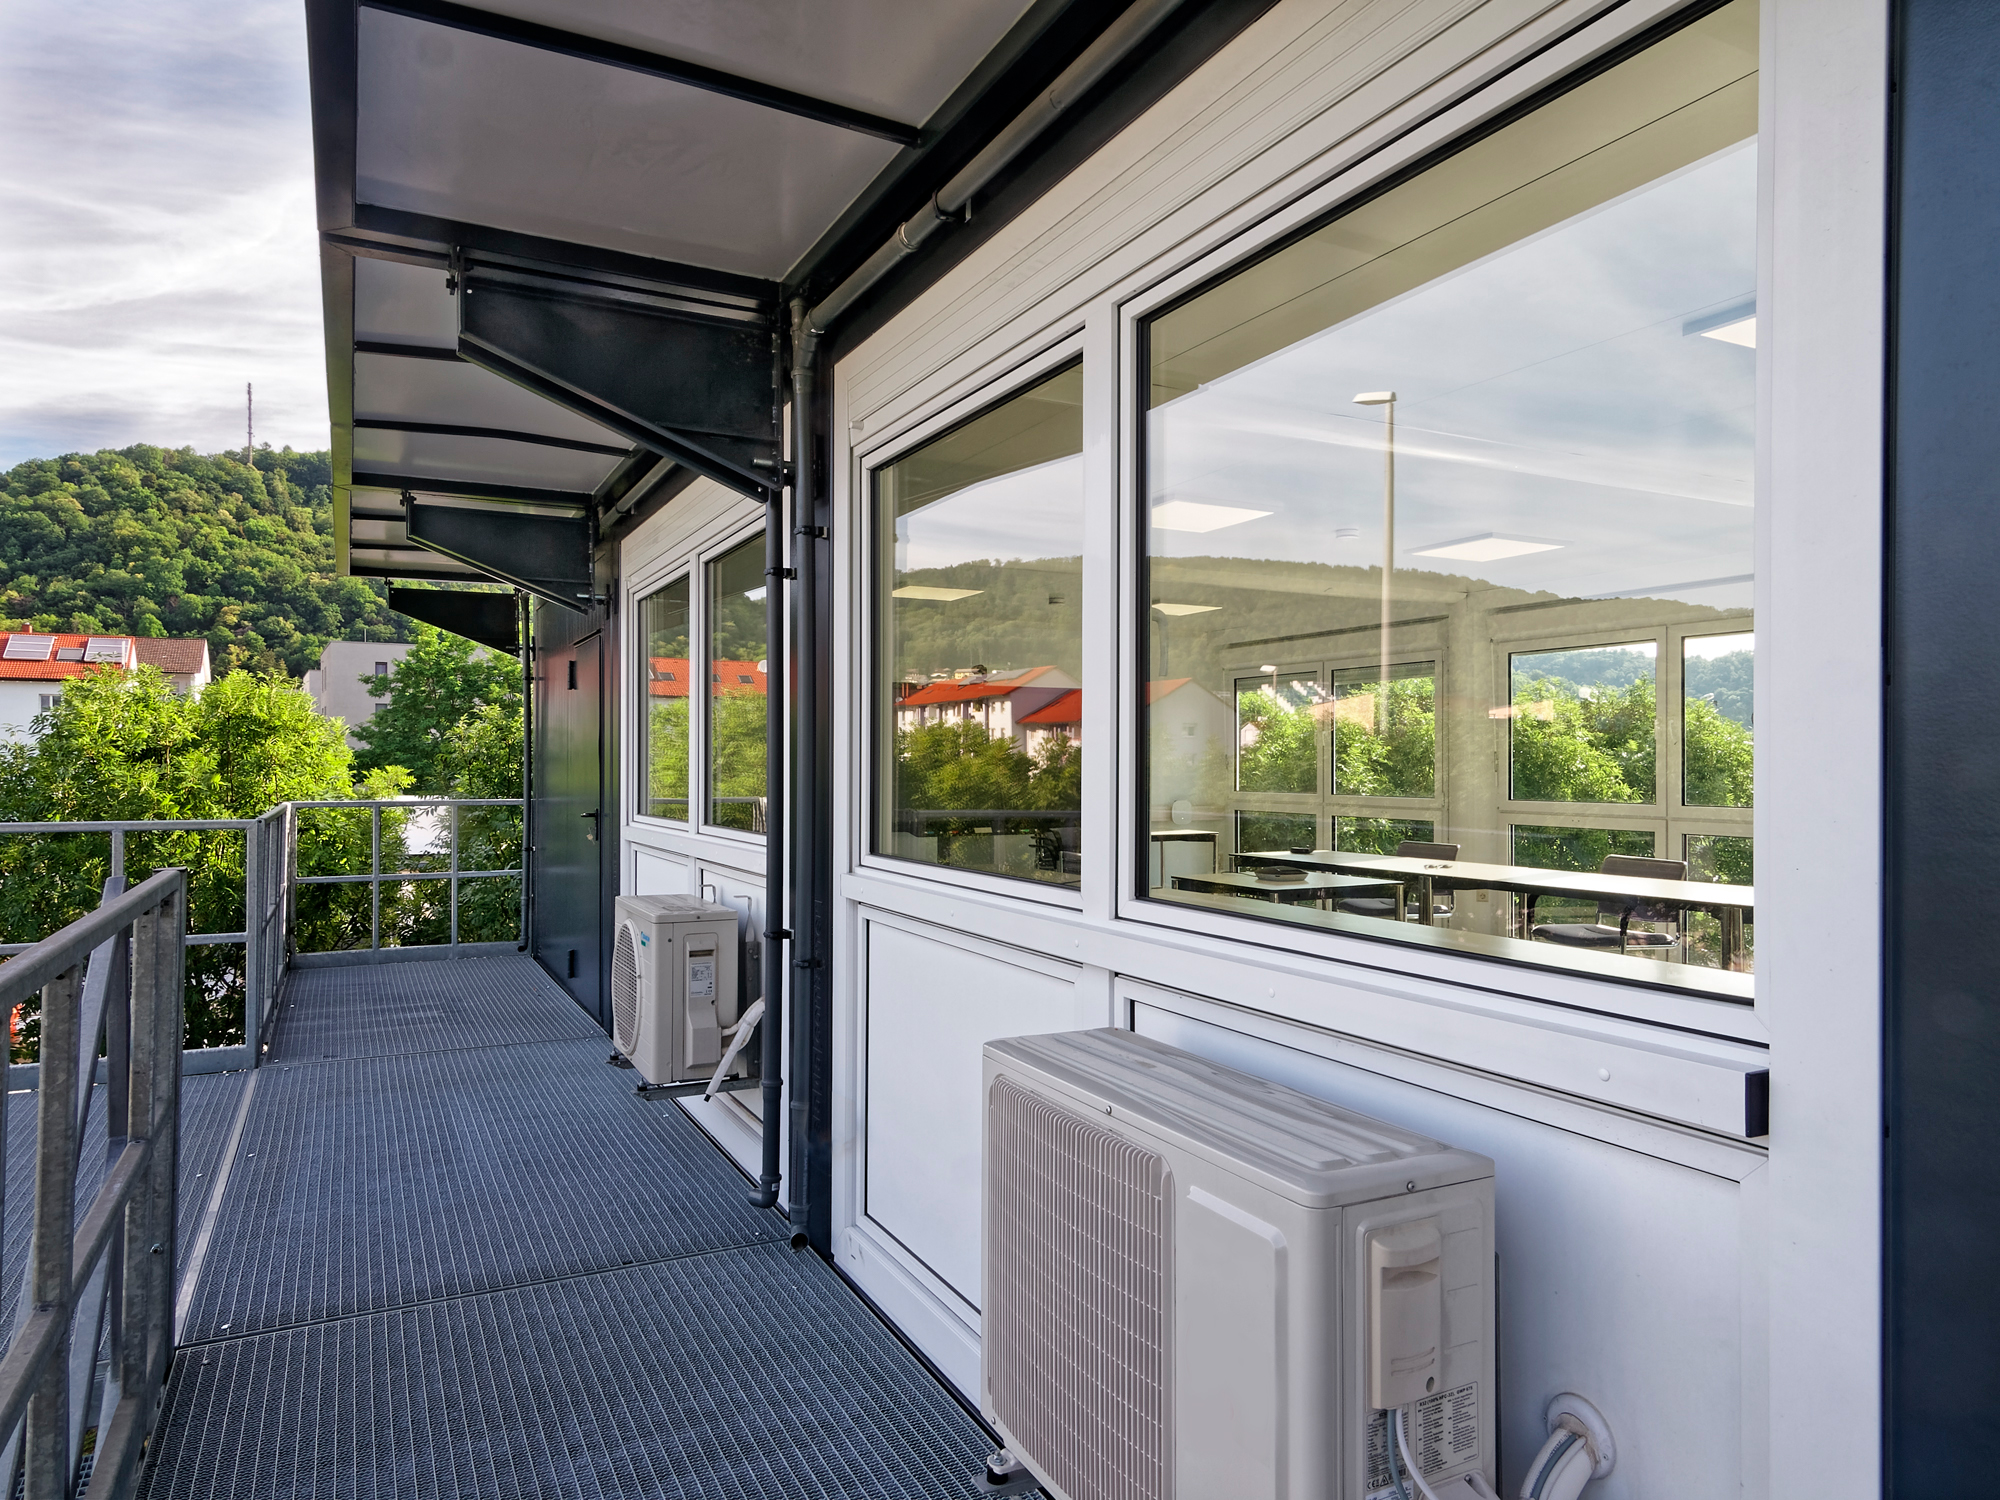 Insulating glazing, roller shutters and split air conditioning units ensure a pleasant indoor climate regardless of the season.